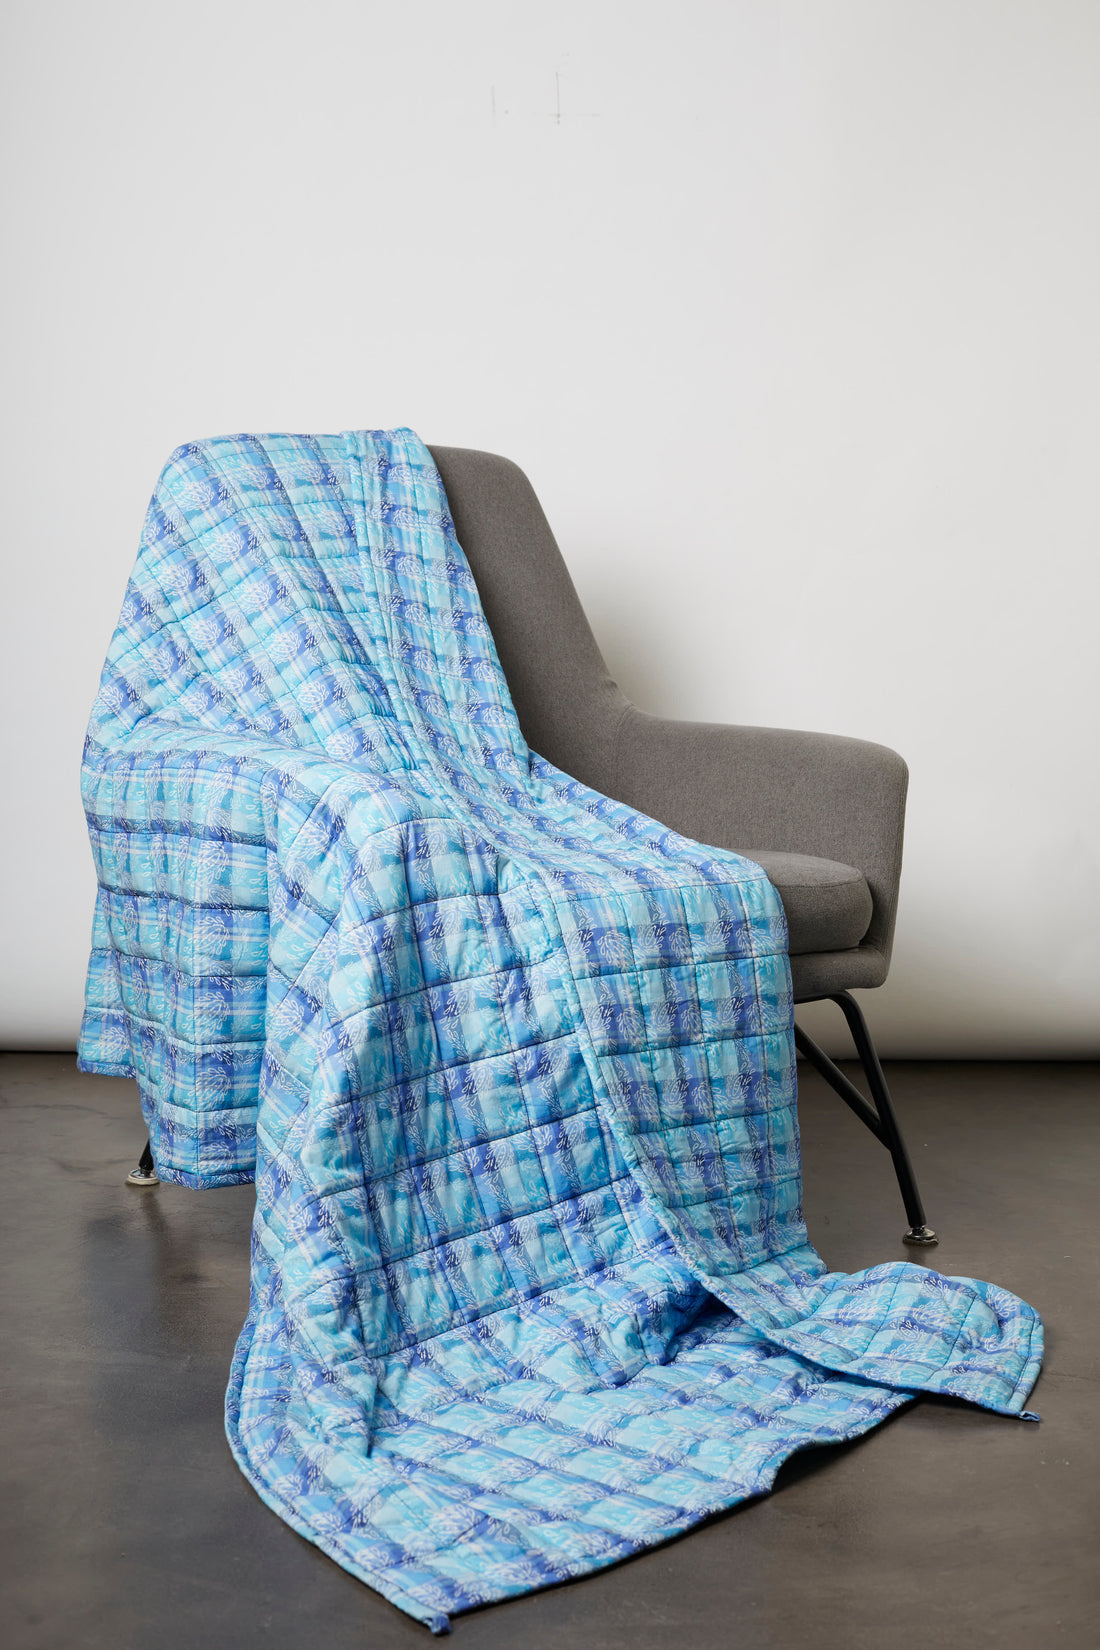 7 Incredible Benefits of Weighted Blanket For Teens